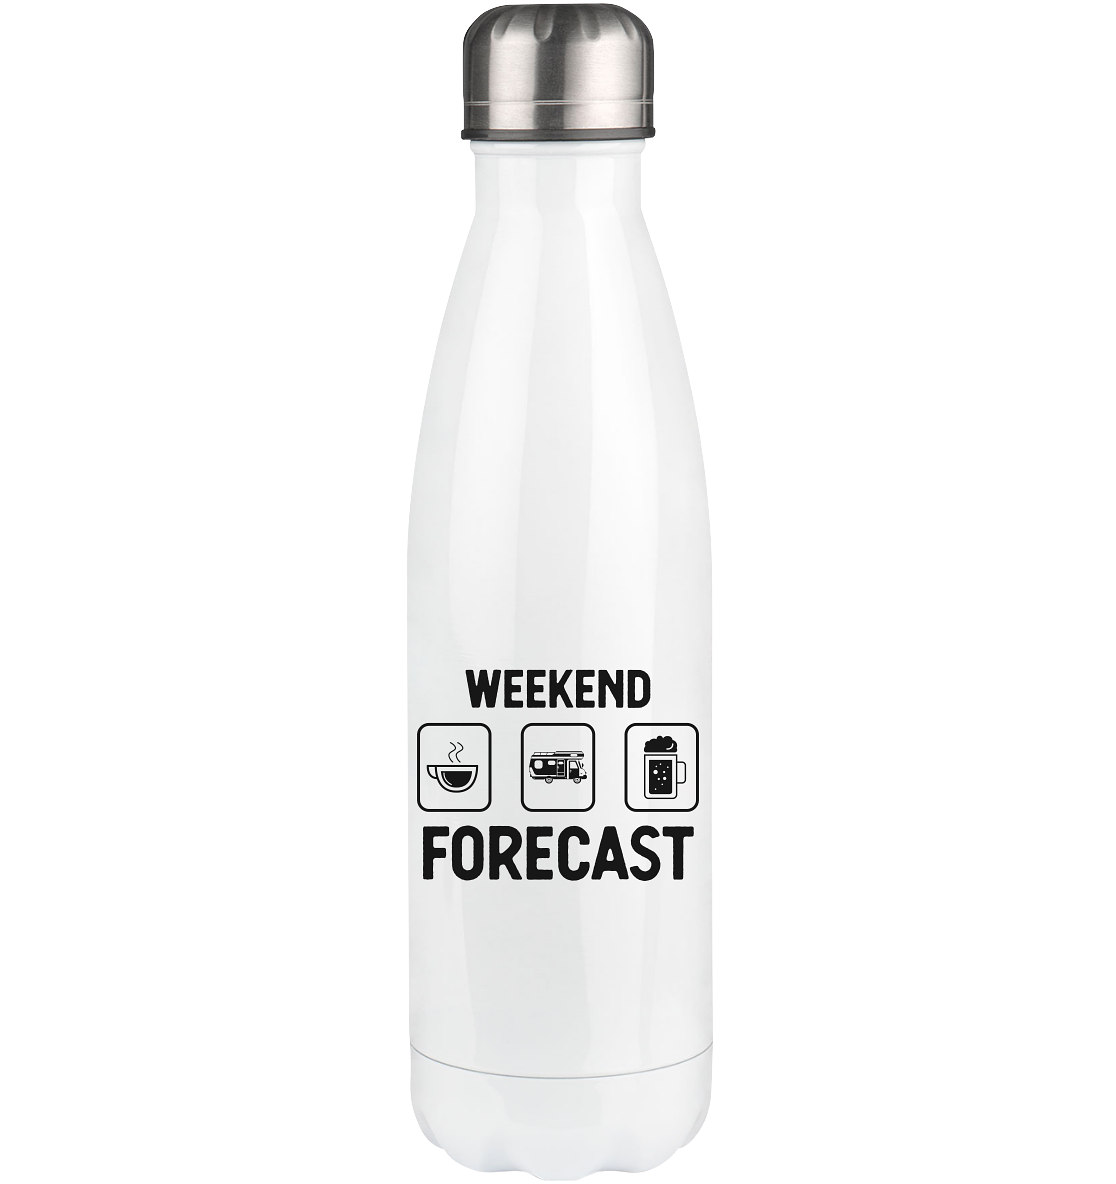 Weekend Forecast - Edelstahl Thermosflasche camping 500ml